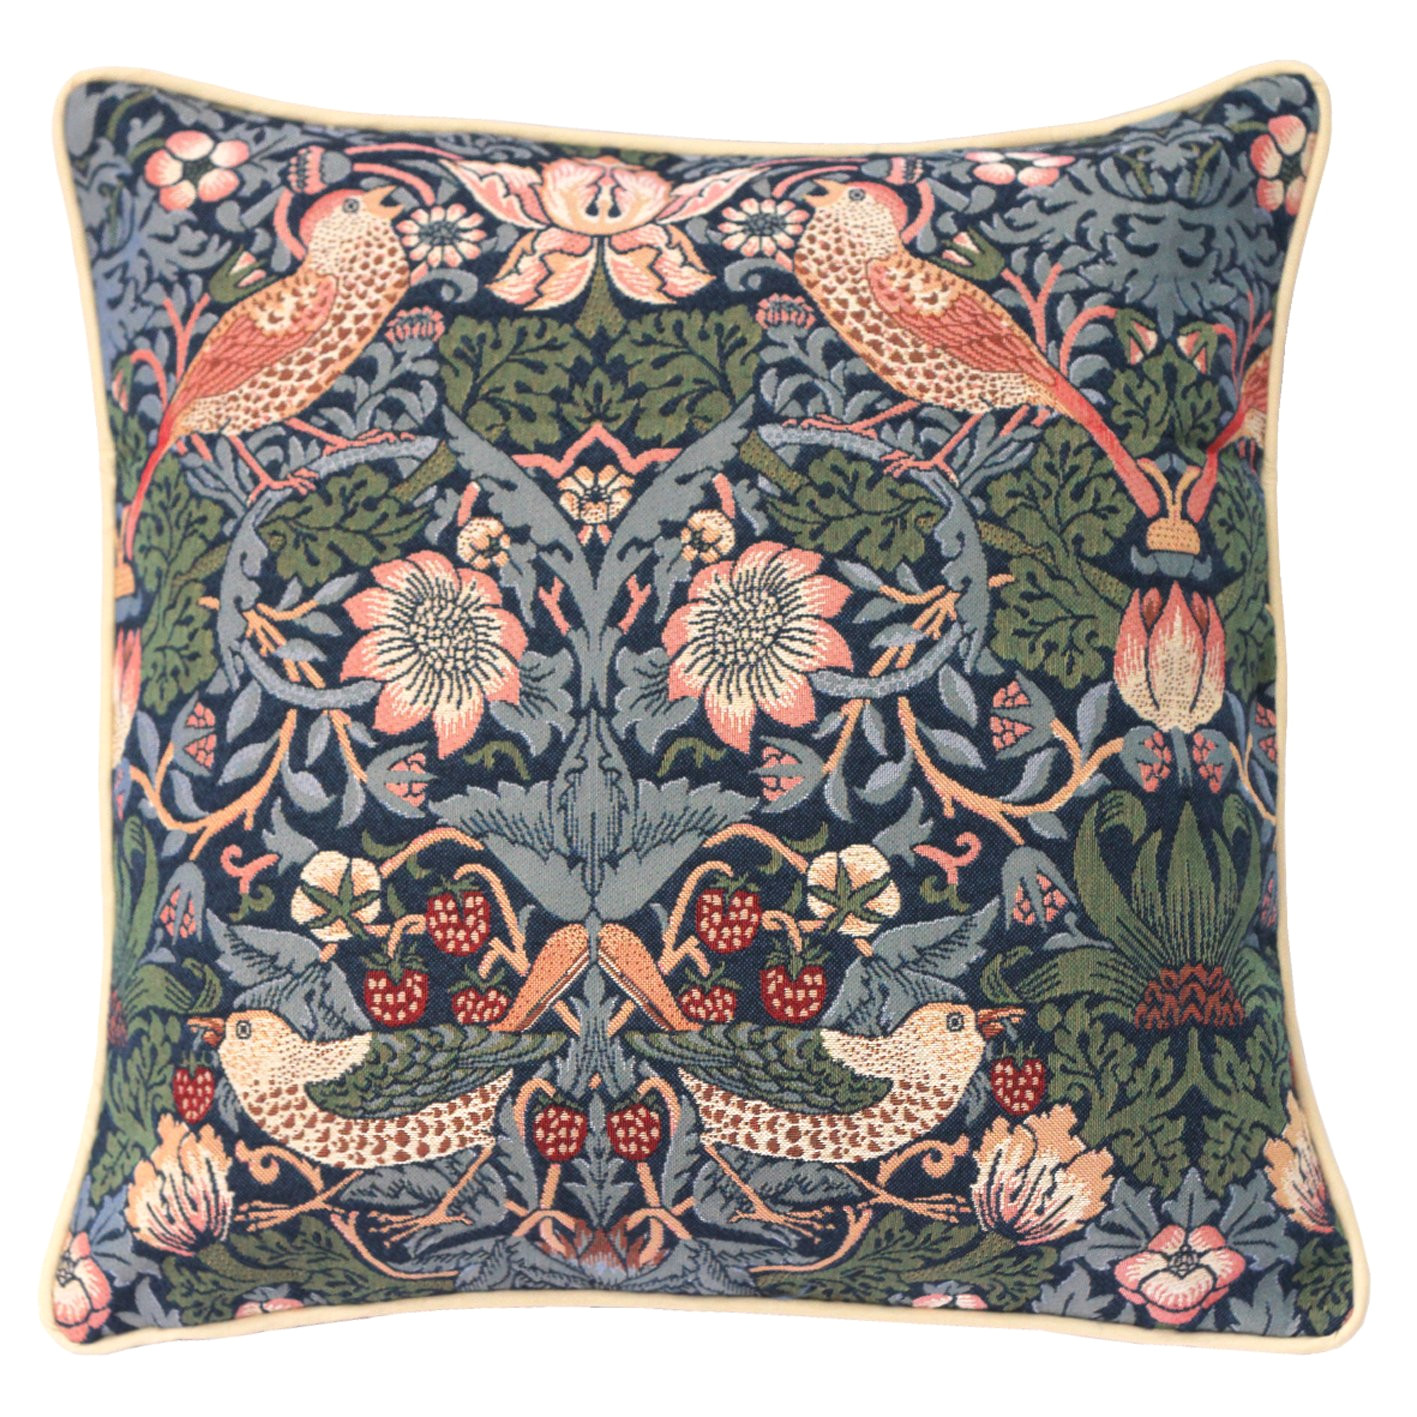 signare tapestry double sided square cushion cover william morris strawberry thief blue ccov stbl amazon co uk kitchen home